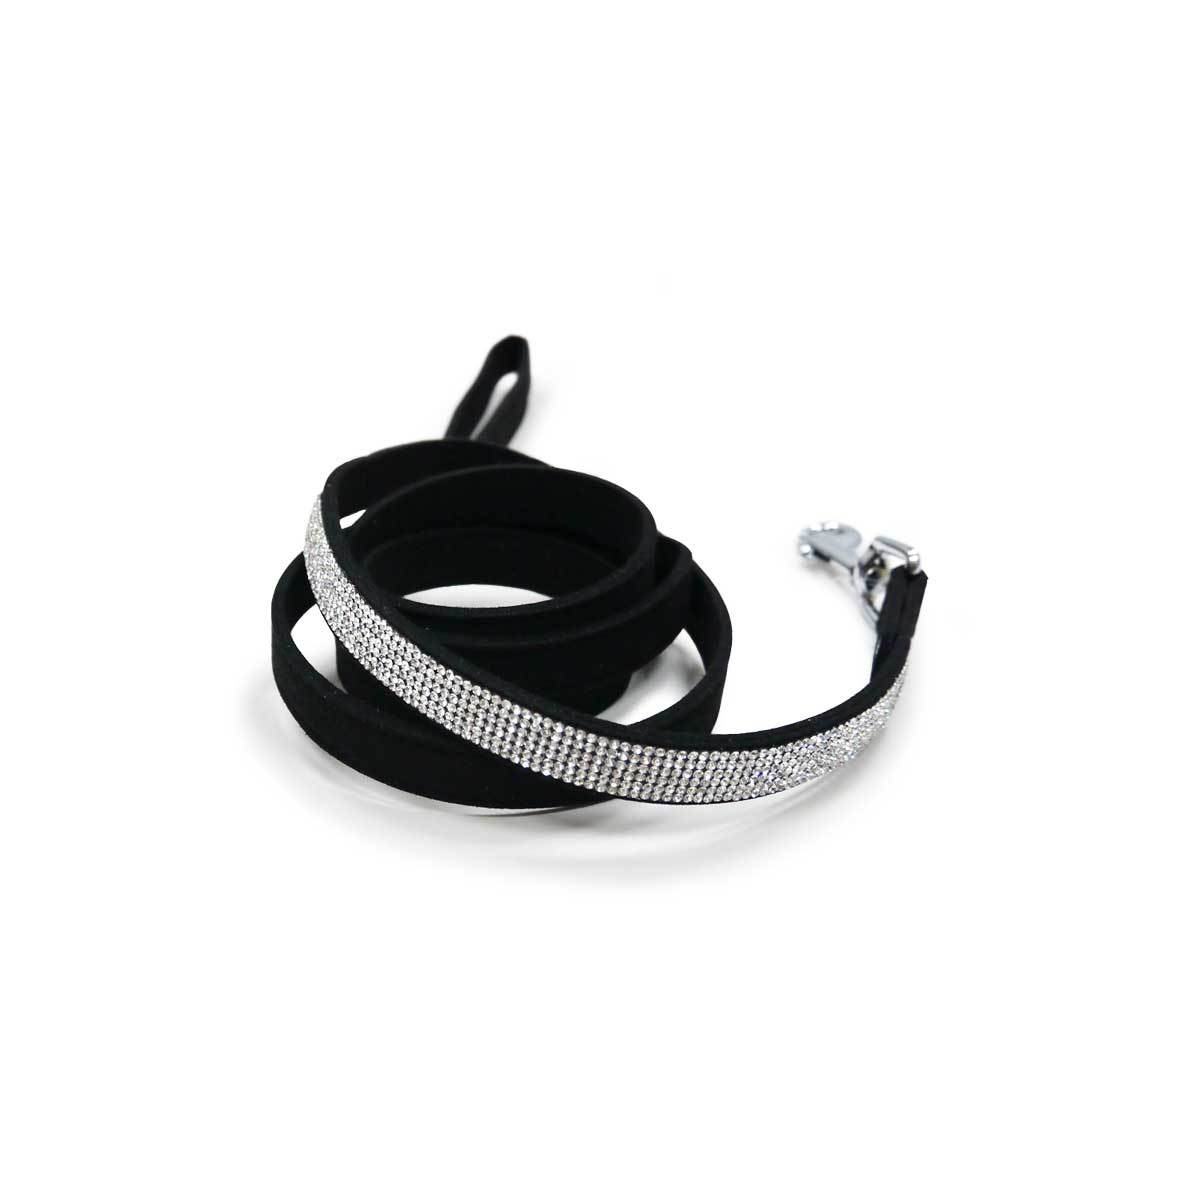 VIP Bling Dog Leash in Black | Pawlicious & Company